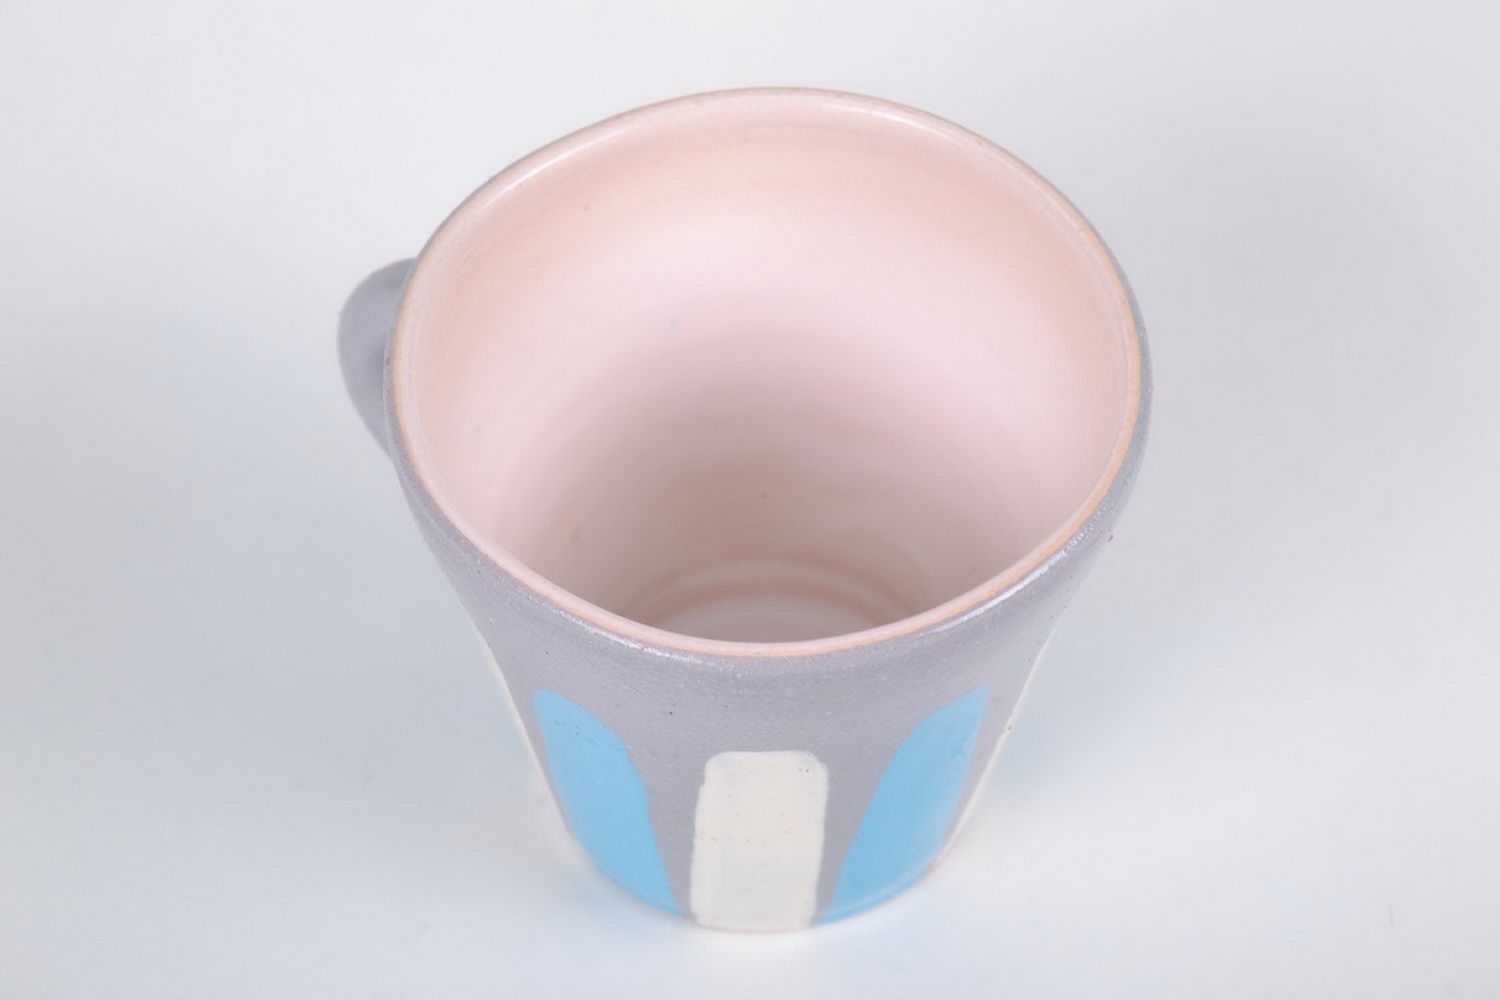 Porcelain 3 oz tea cup in grey, white, and blue colors photo 4